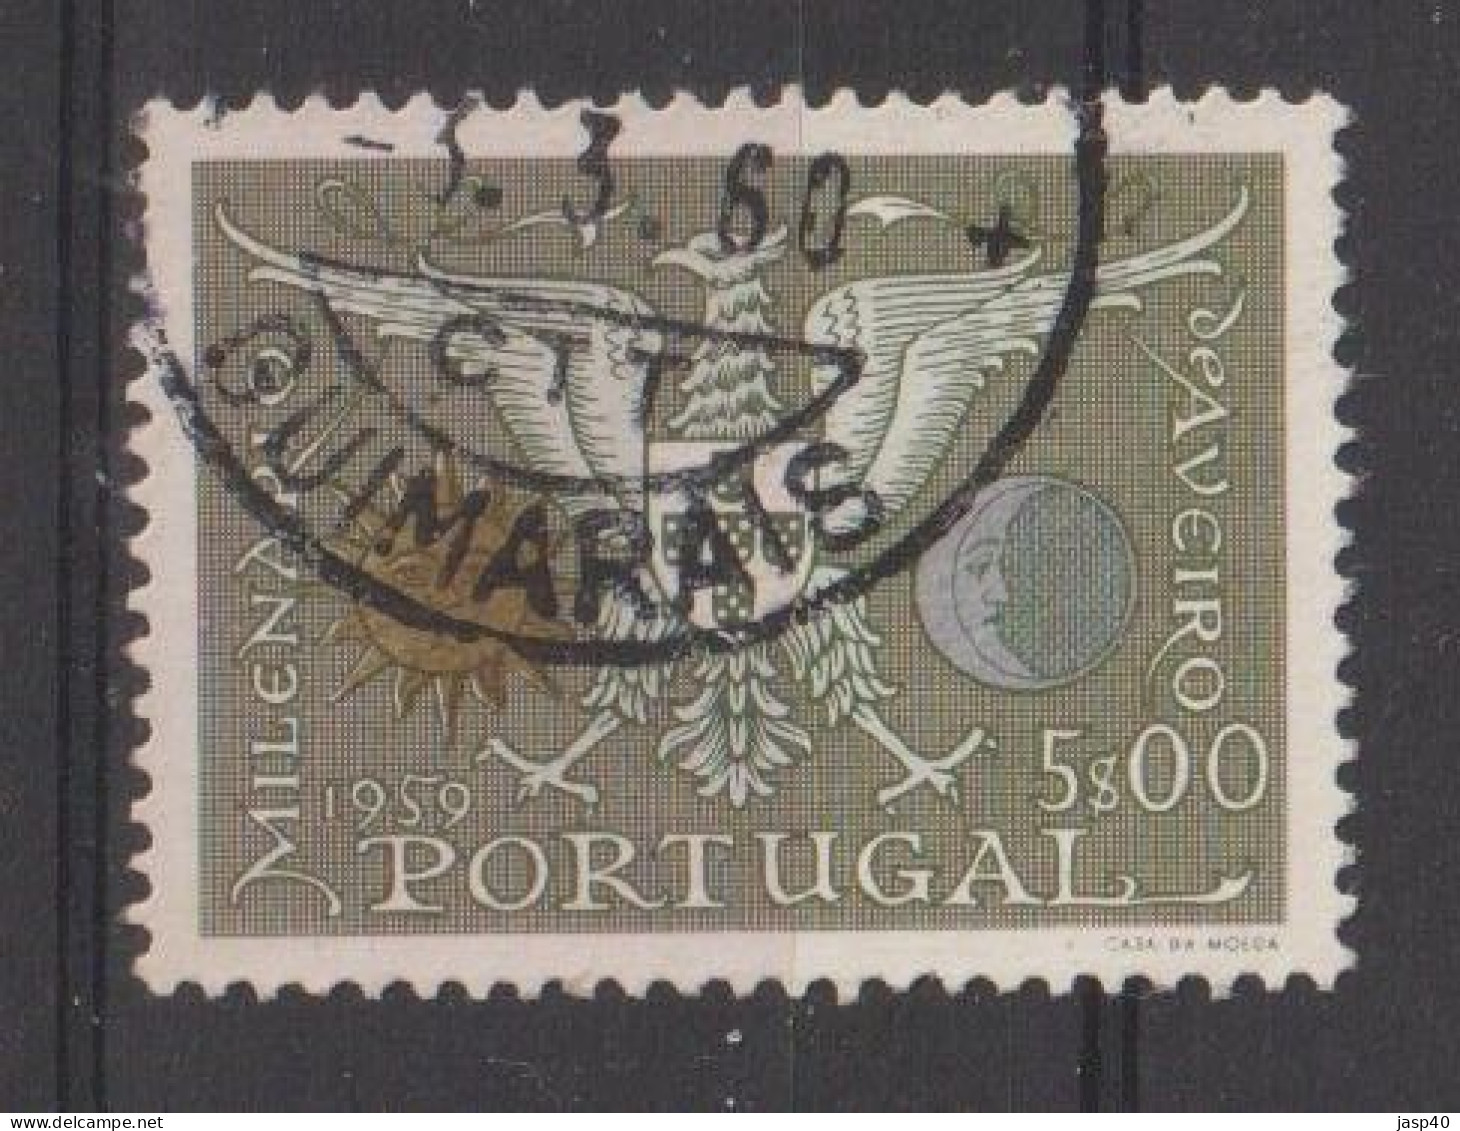 PORTUGAL 848 - POSTMARKS OF PORTUGAL - GUIMARÃES - Used Stamps